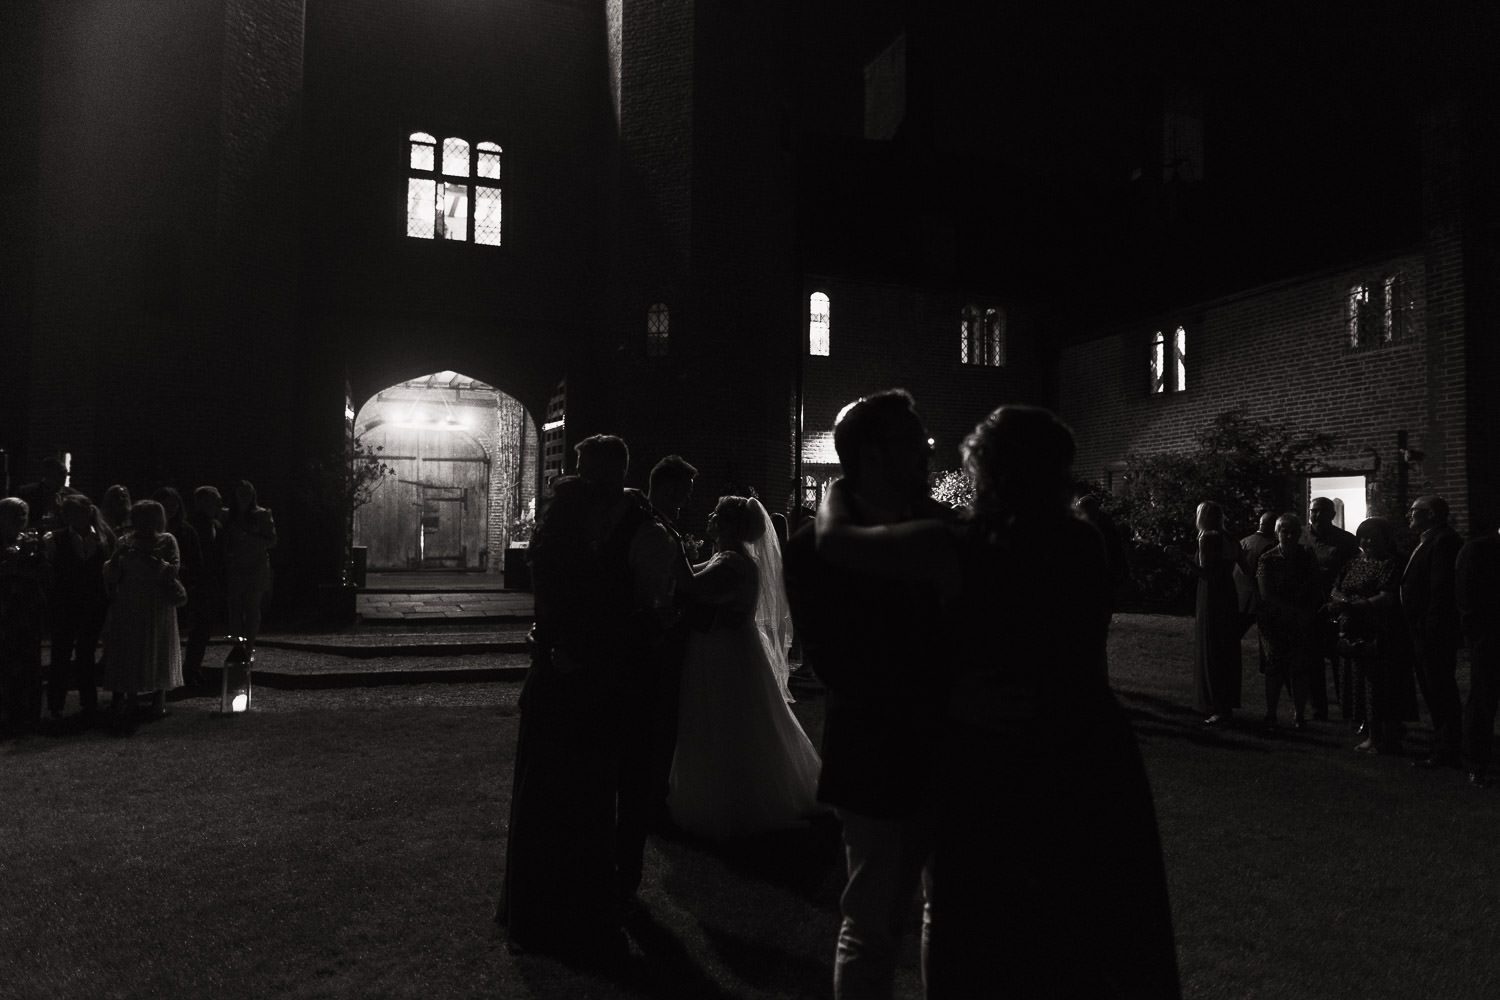 In the evening a bride and groom are having their first dance outside on the lawn. Their friends and family have joined in with the slow dance. They are illuminated by the light from the Leez Priory carriageway.